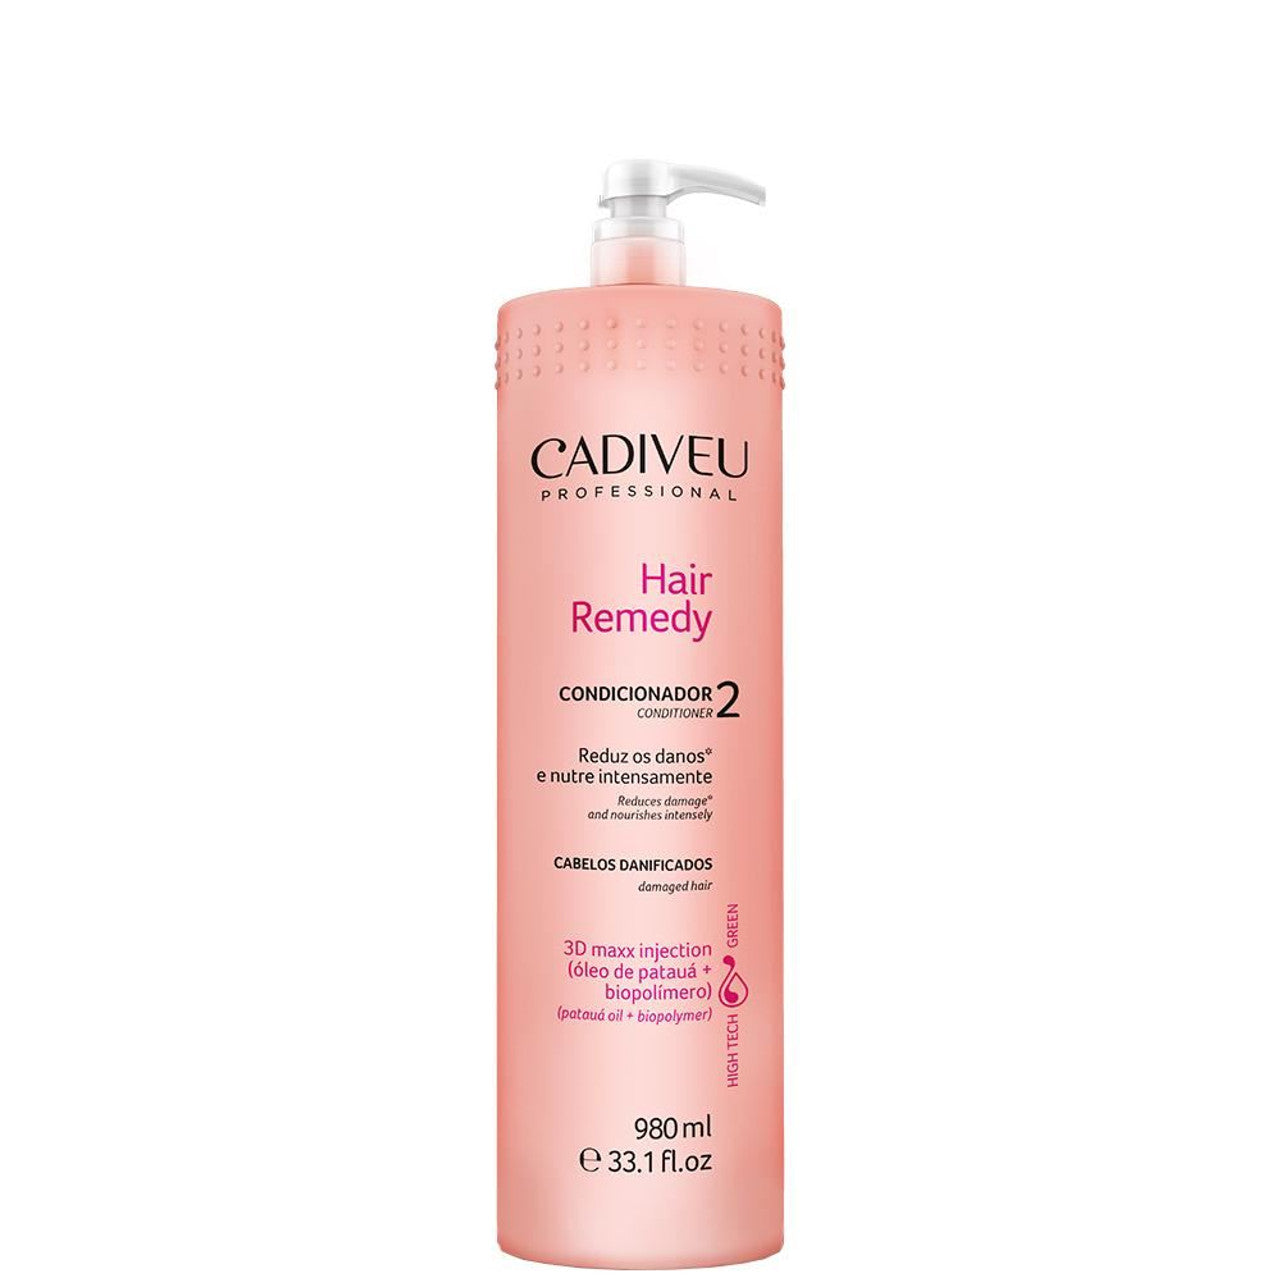 Cadiveu, Hair Remedy Step 2, Restoring Conditioner For Hair, 980ml